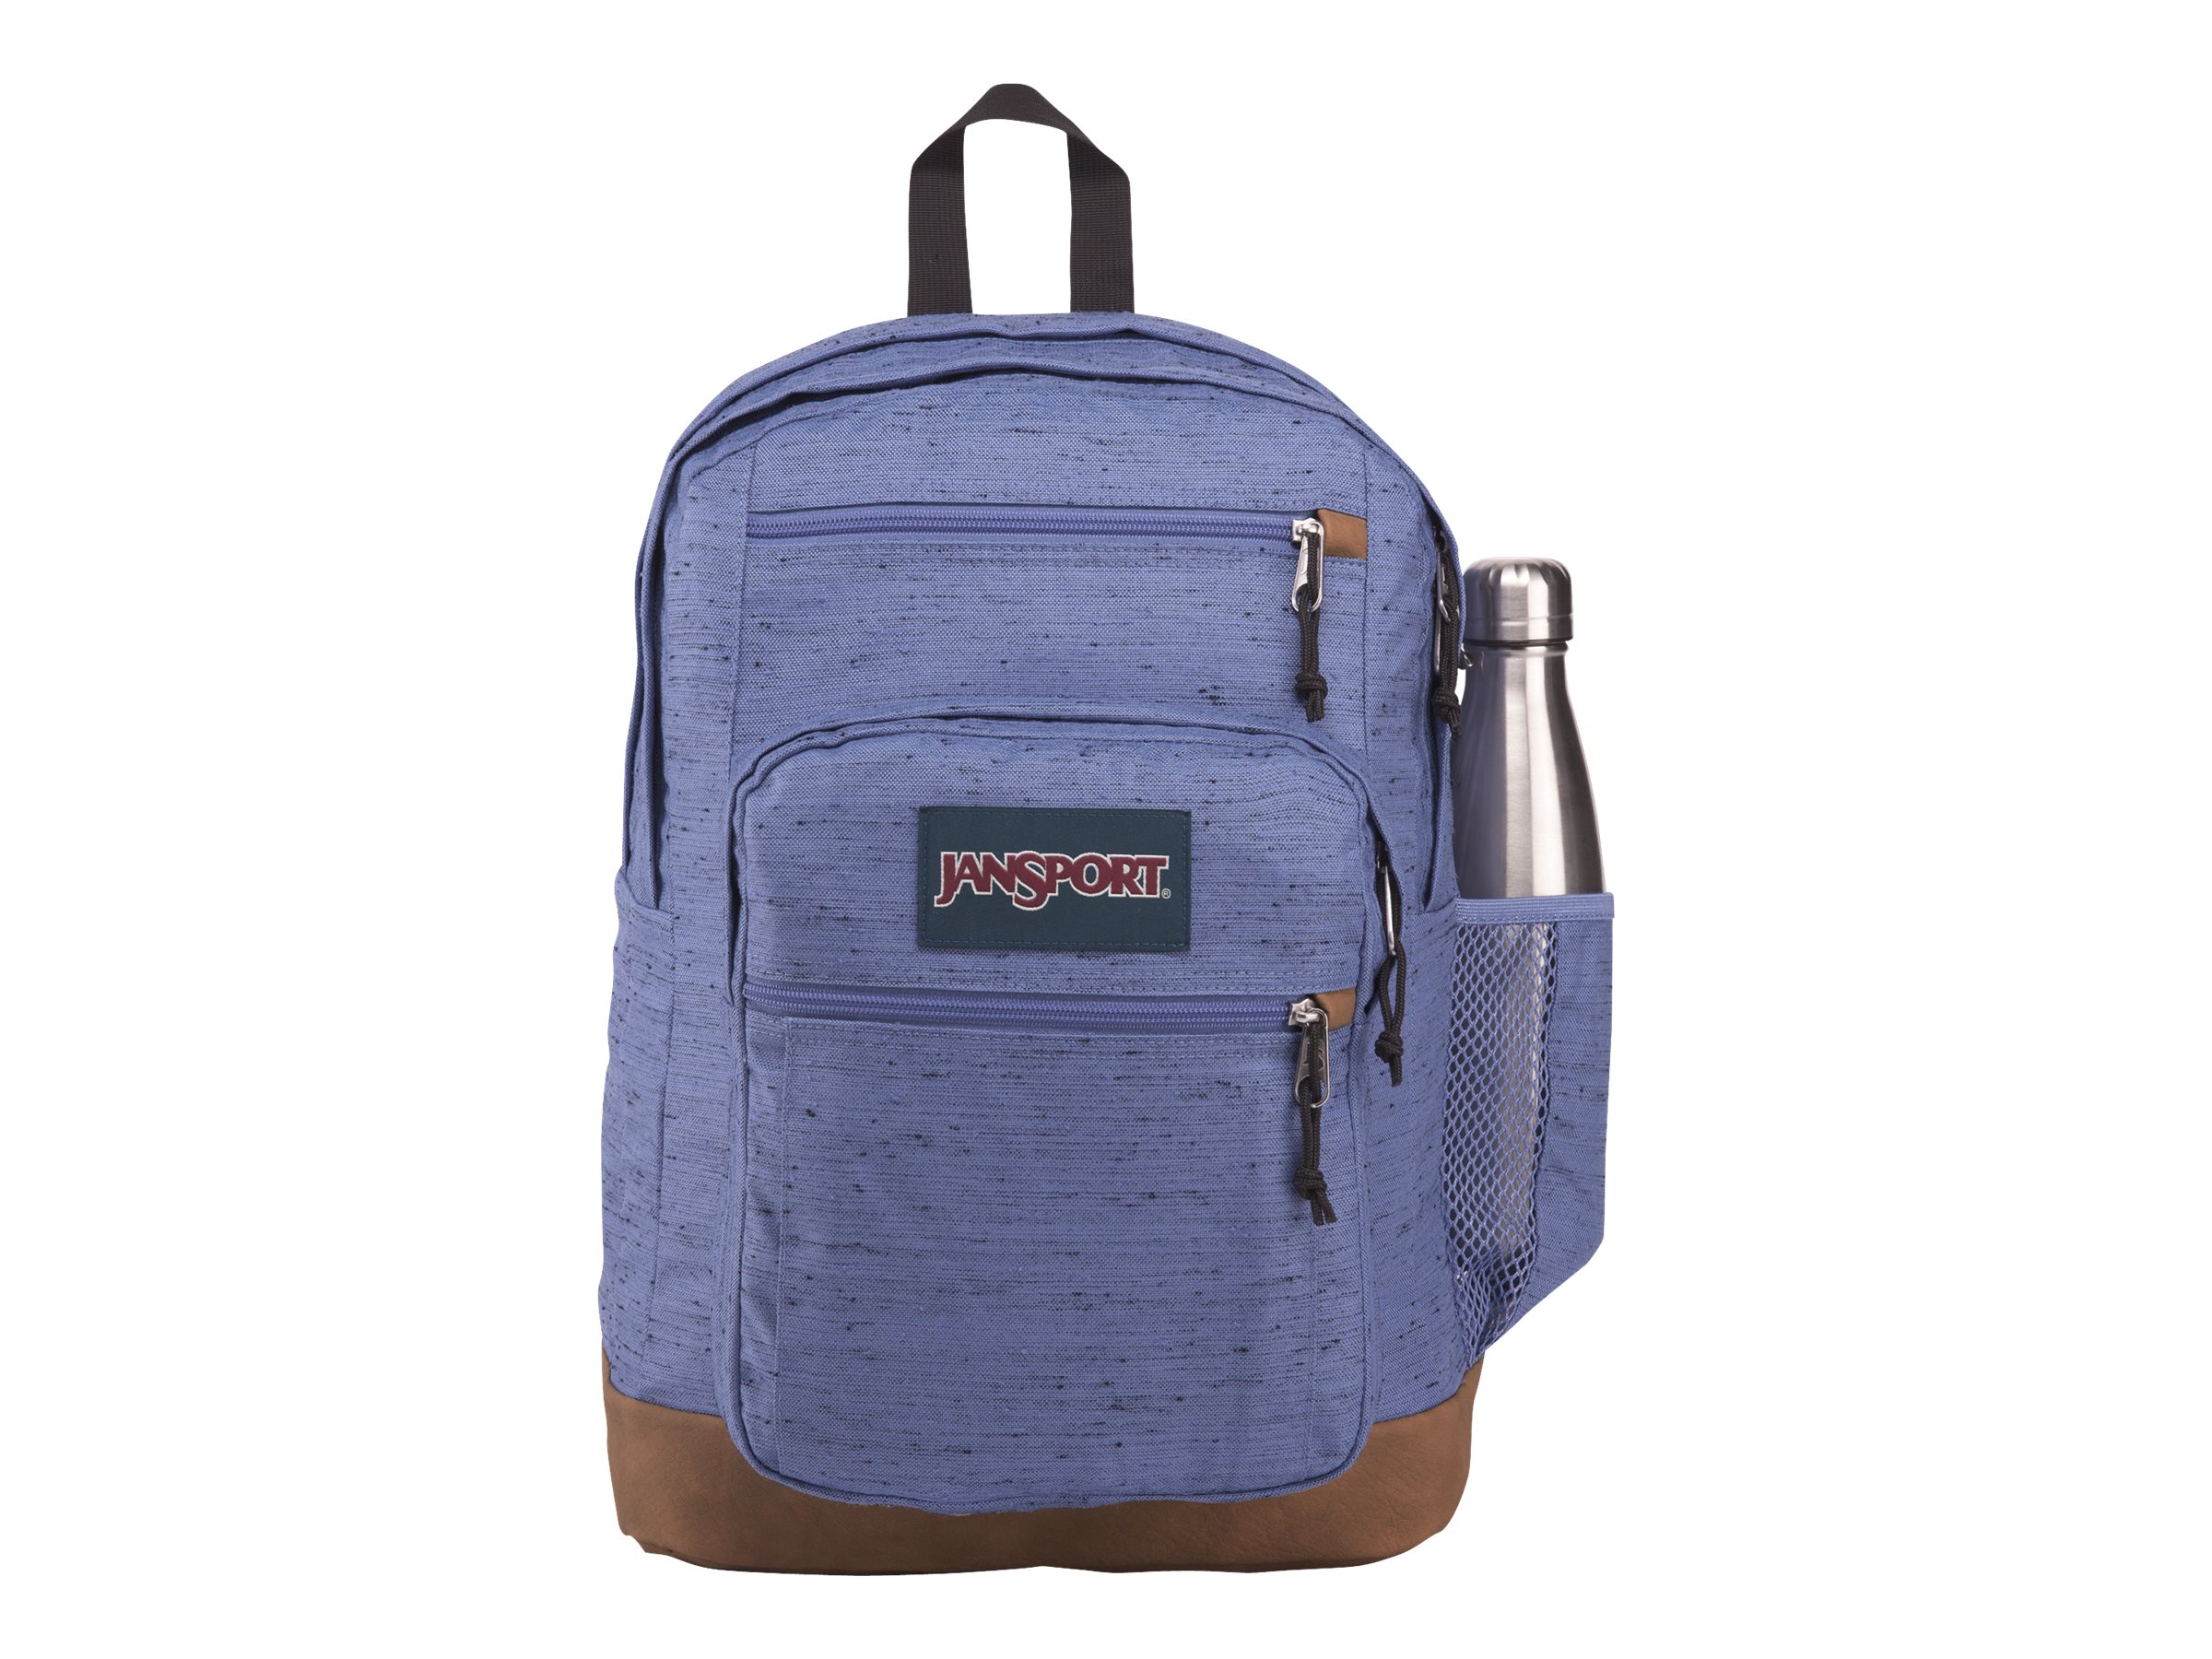 JanSport Cool Student - Notebook carrying backpack - 15" - image 4 of 4